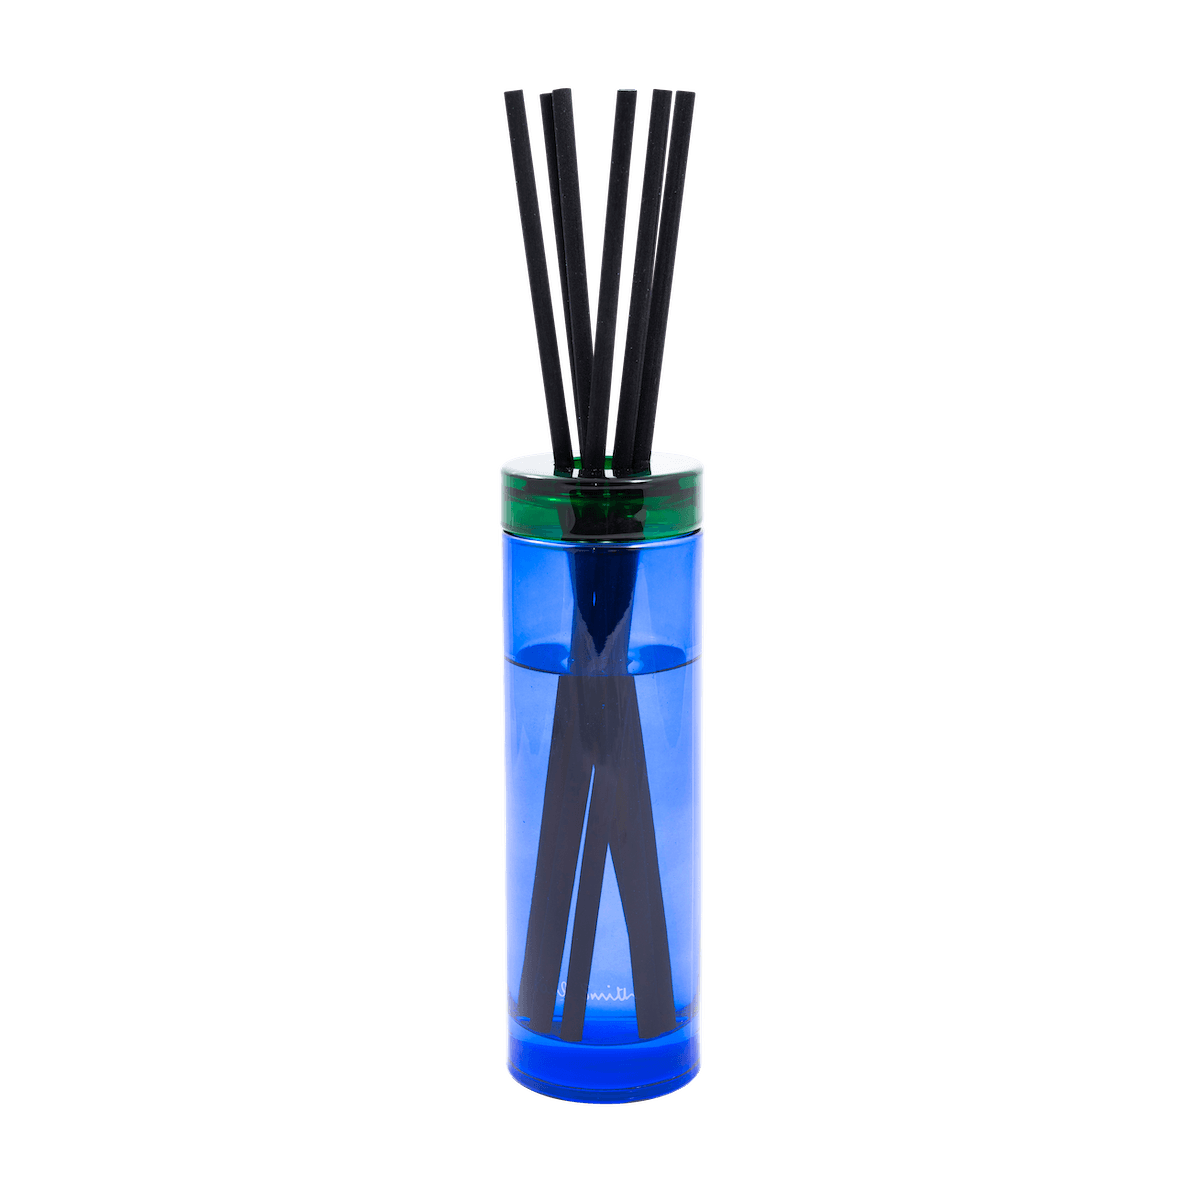 Image of Early bird reed diffuser by Paul Smith